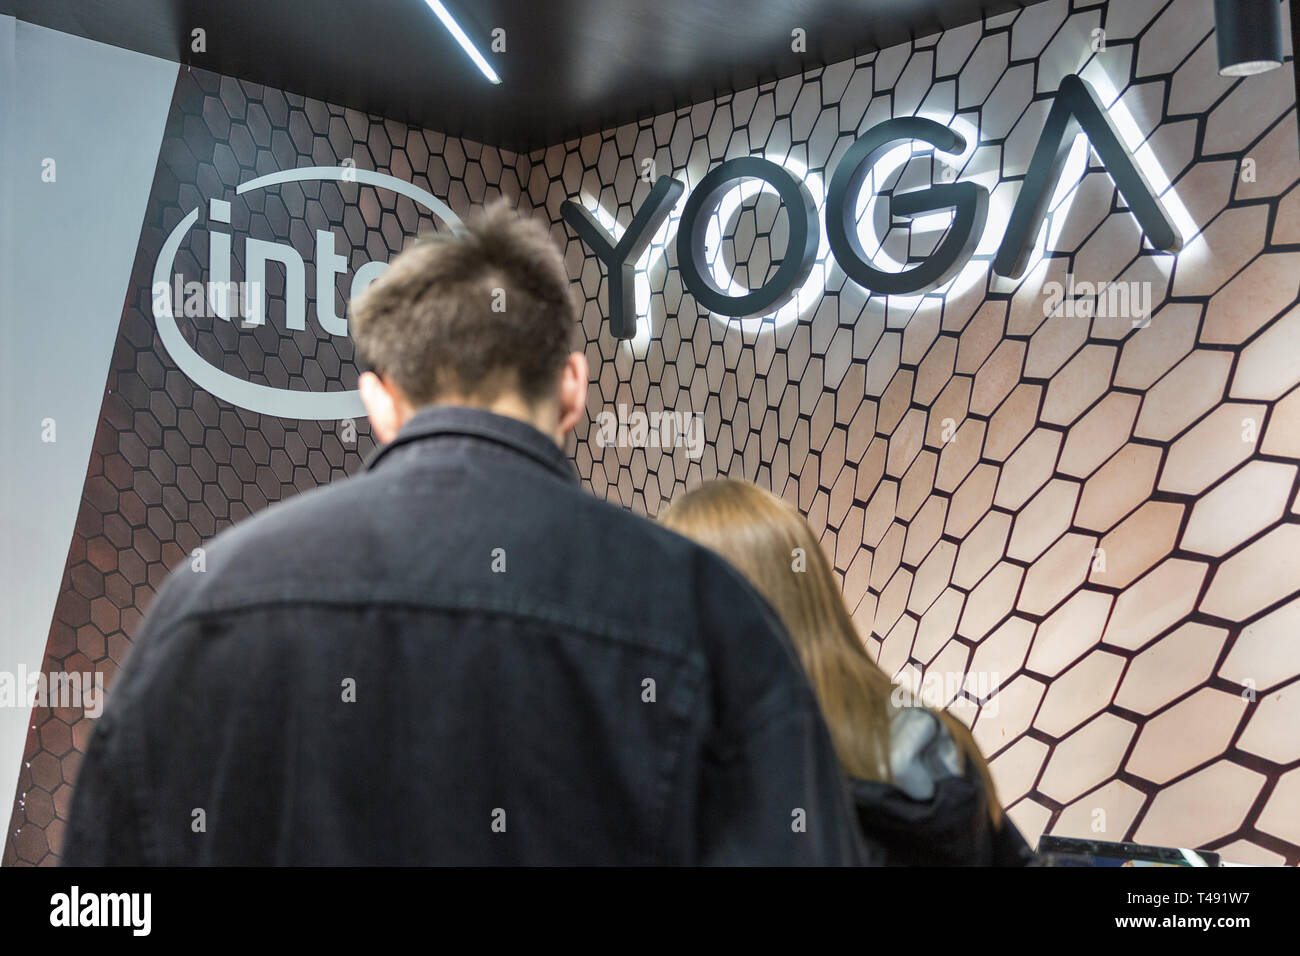 KYIV, UKRAINE - APRIL 06, 2019: People visit Lenovo Intel Yoga, a Chinese multinational technology company booth during CEE 2019, the largest electron Stock Photo